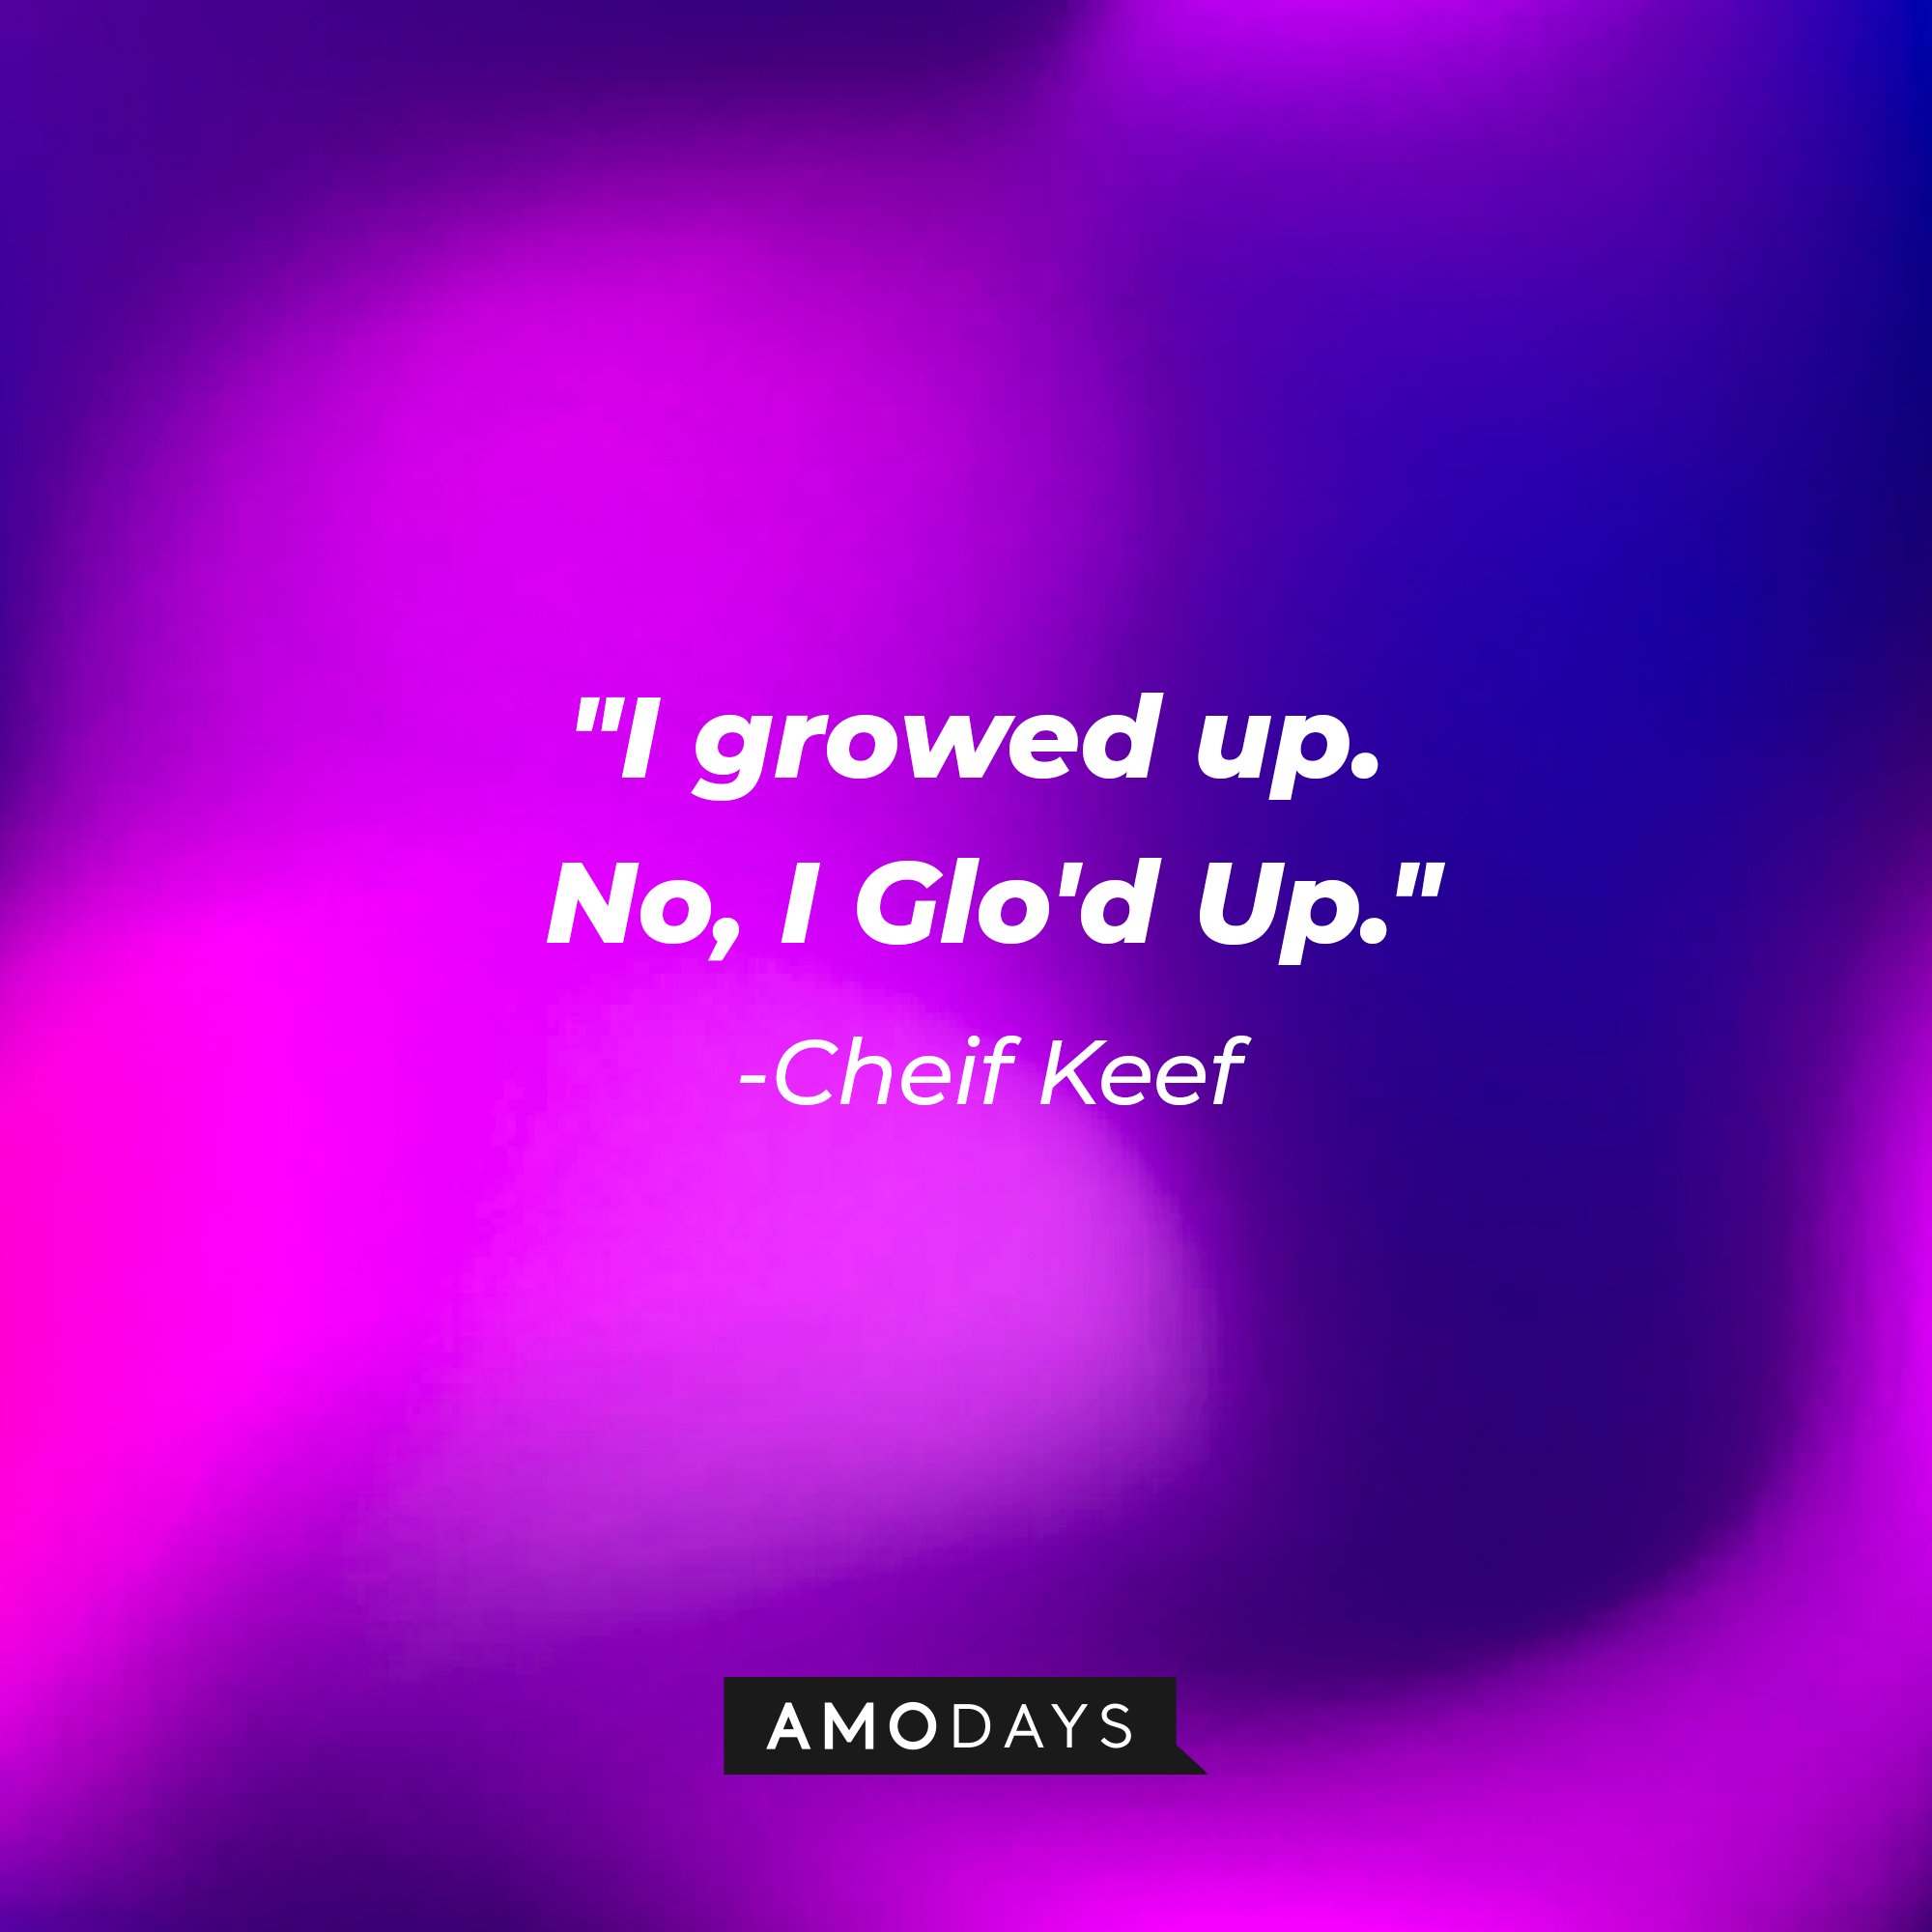 Chief Keef’s quote: "I growed up. No, I Glo'd Up." | Image: AmoDays 